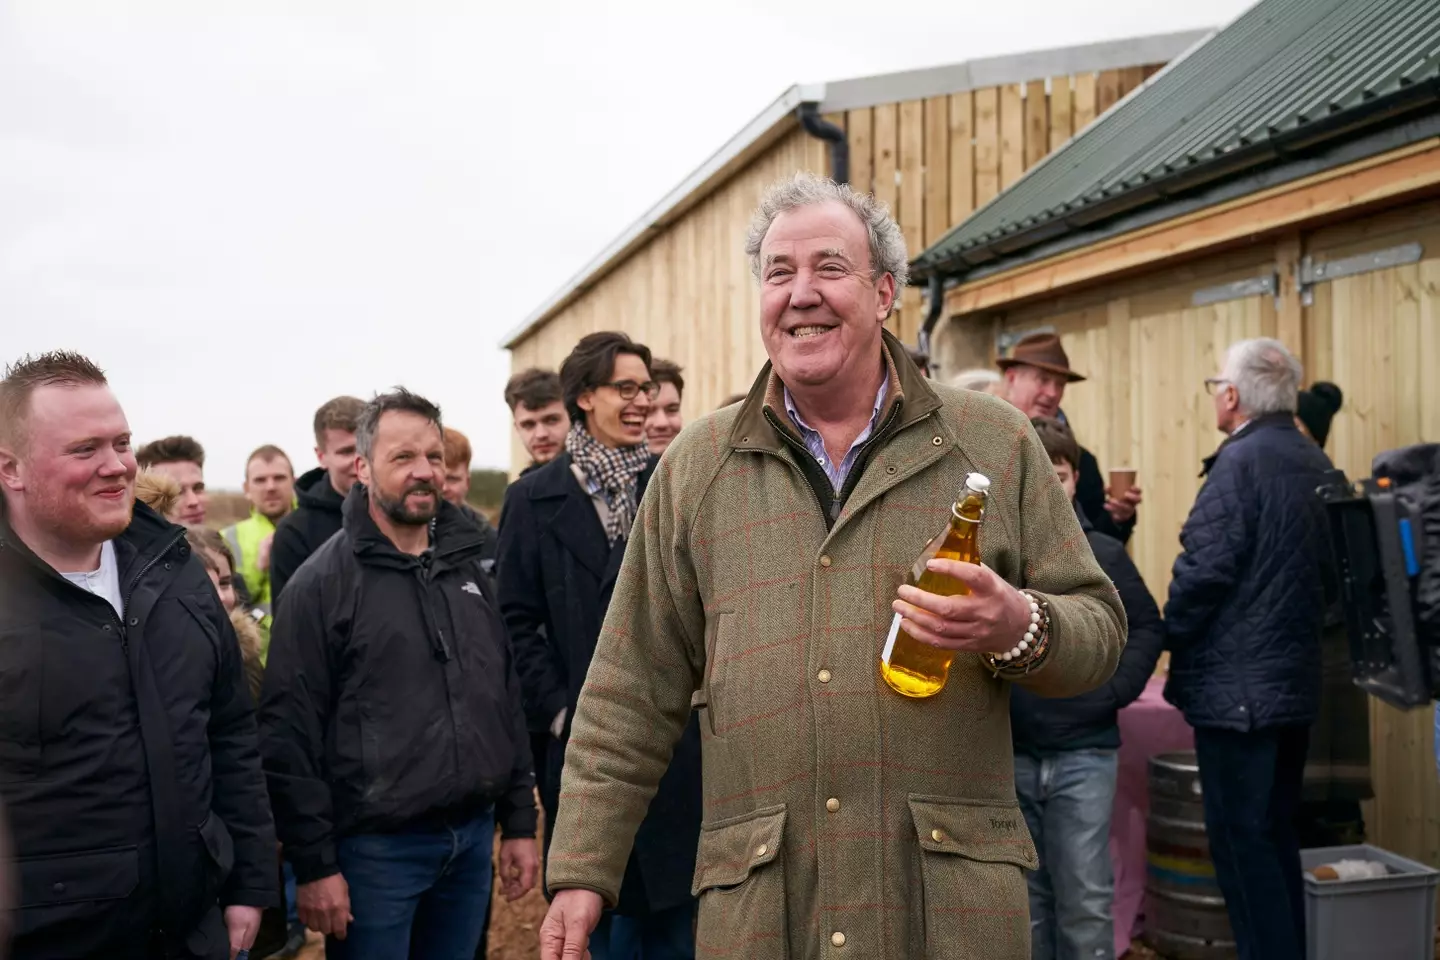 Jeremy Clarkson had wanted to build a restaurant at his farm.